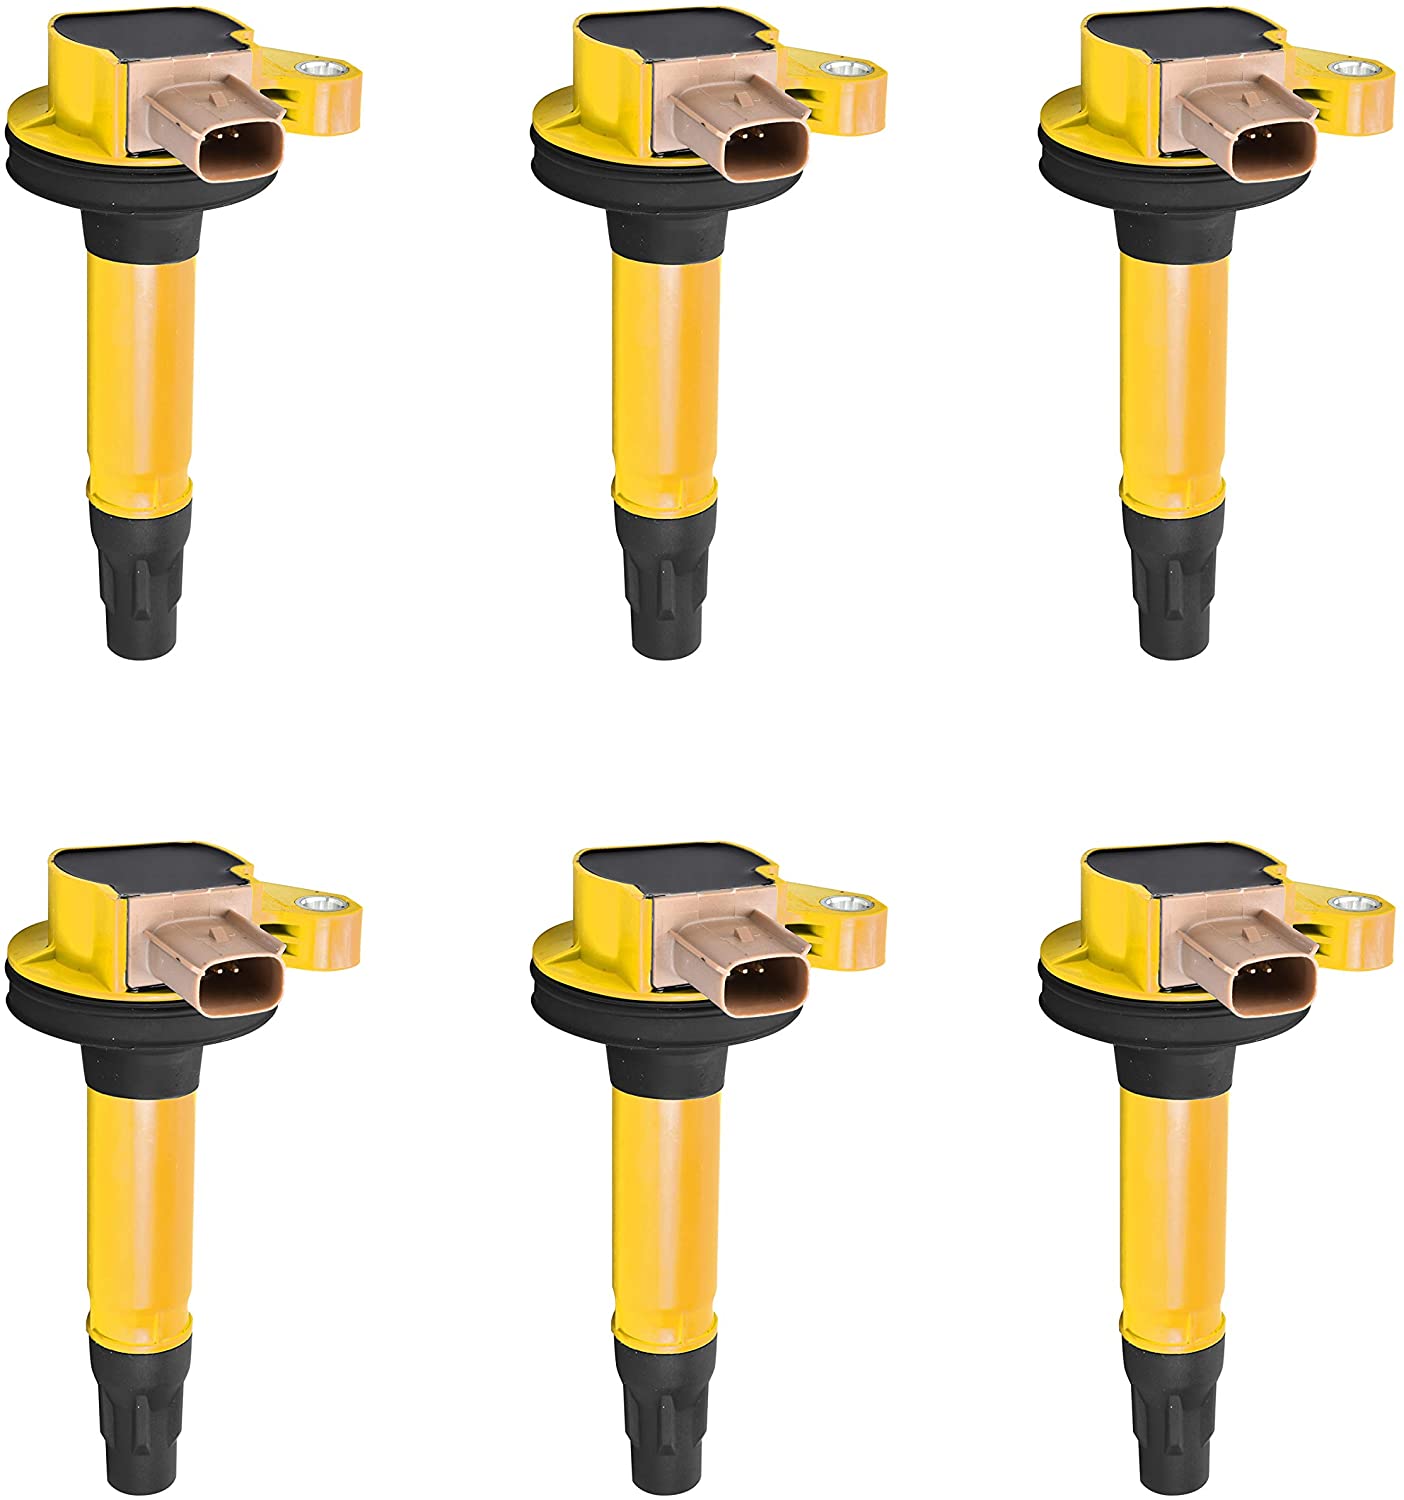 ENA Heavy Duty Ignition Coil Set of 6 Compatible with 2015-2017 Ford Transit 150 250 350 2013-2017 Ford Explorer V6 3.5L and 2011-2015 Ford F150 V6 3.5L (6)